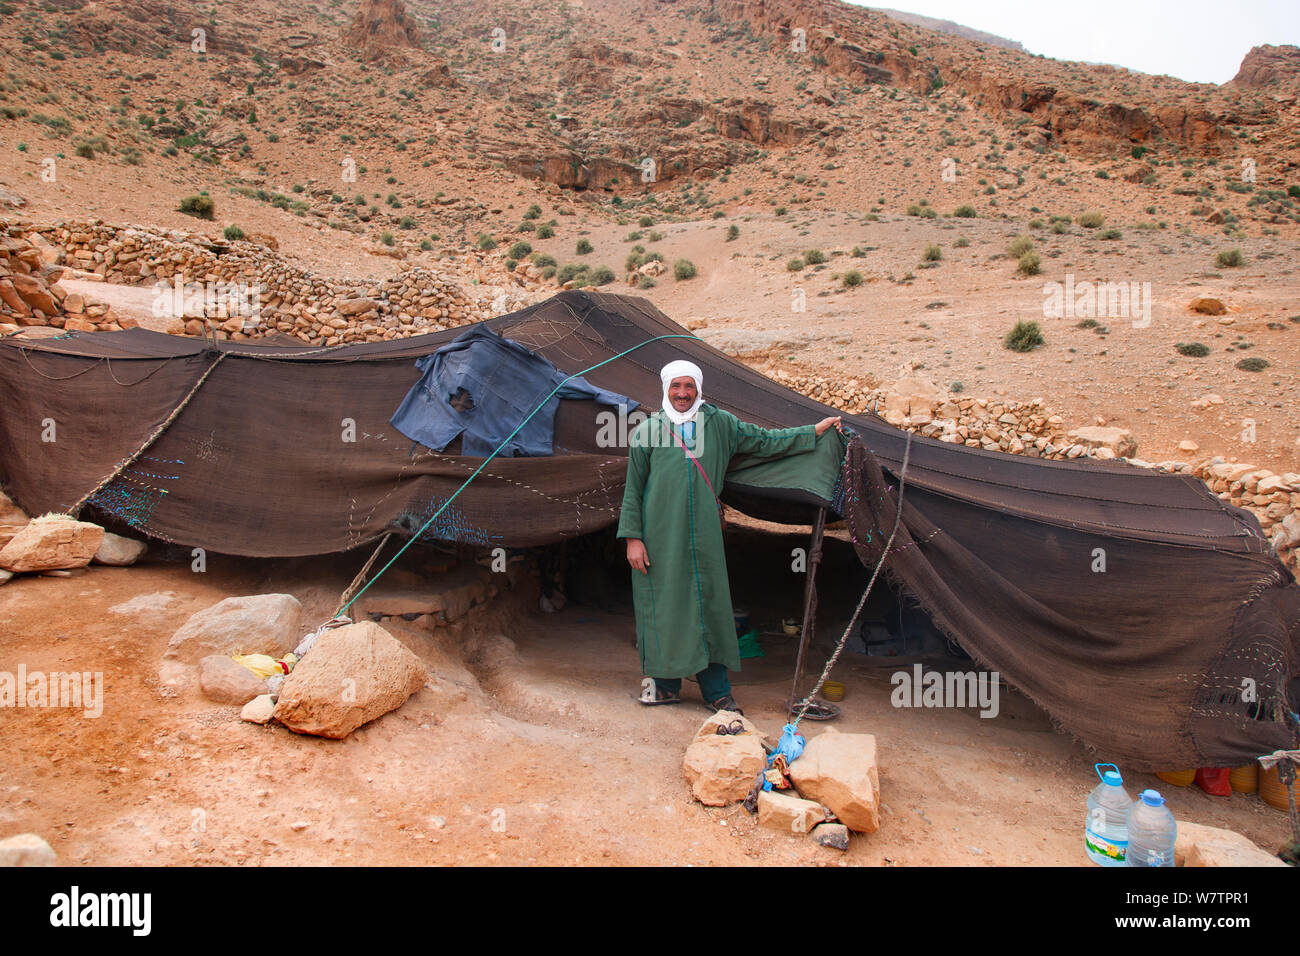 Bedouin nomad standing outside tent, Sahara Desert, Morocco, North Africa, March 2011. Stock Photo